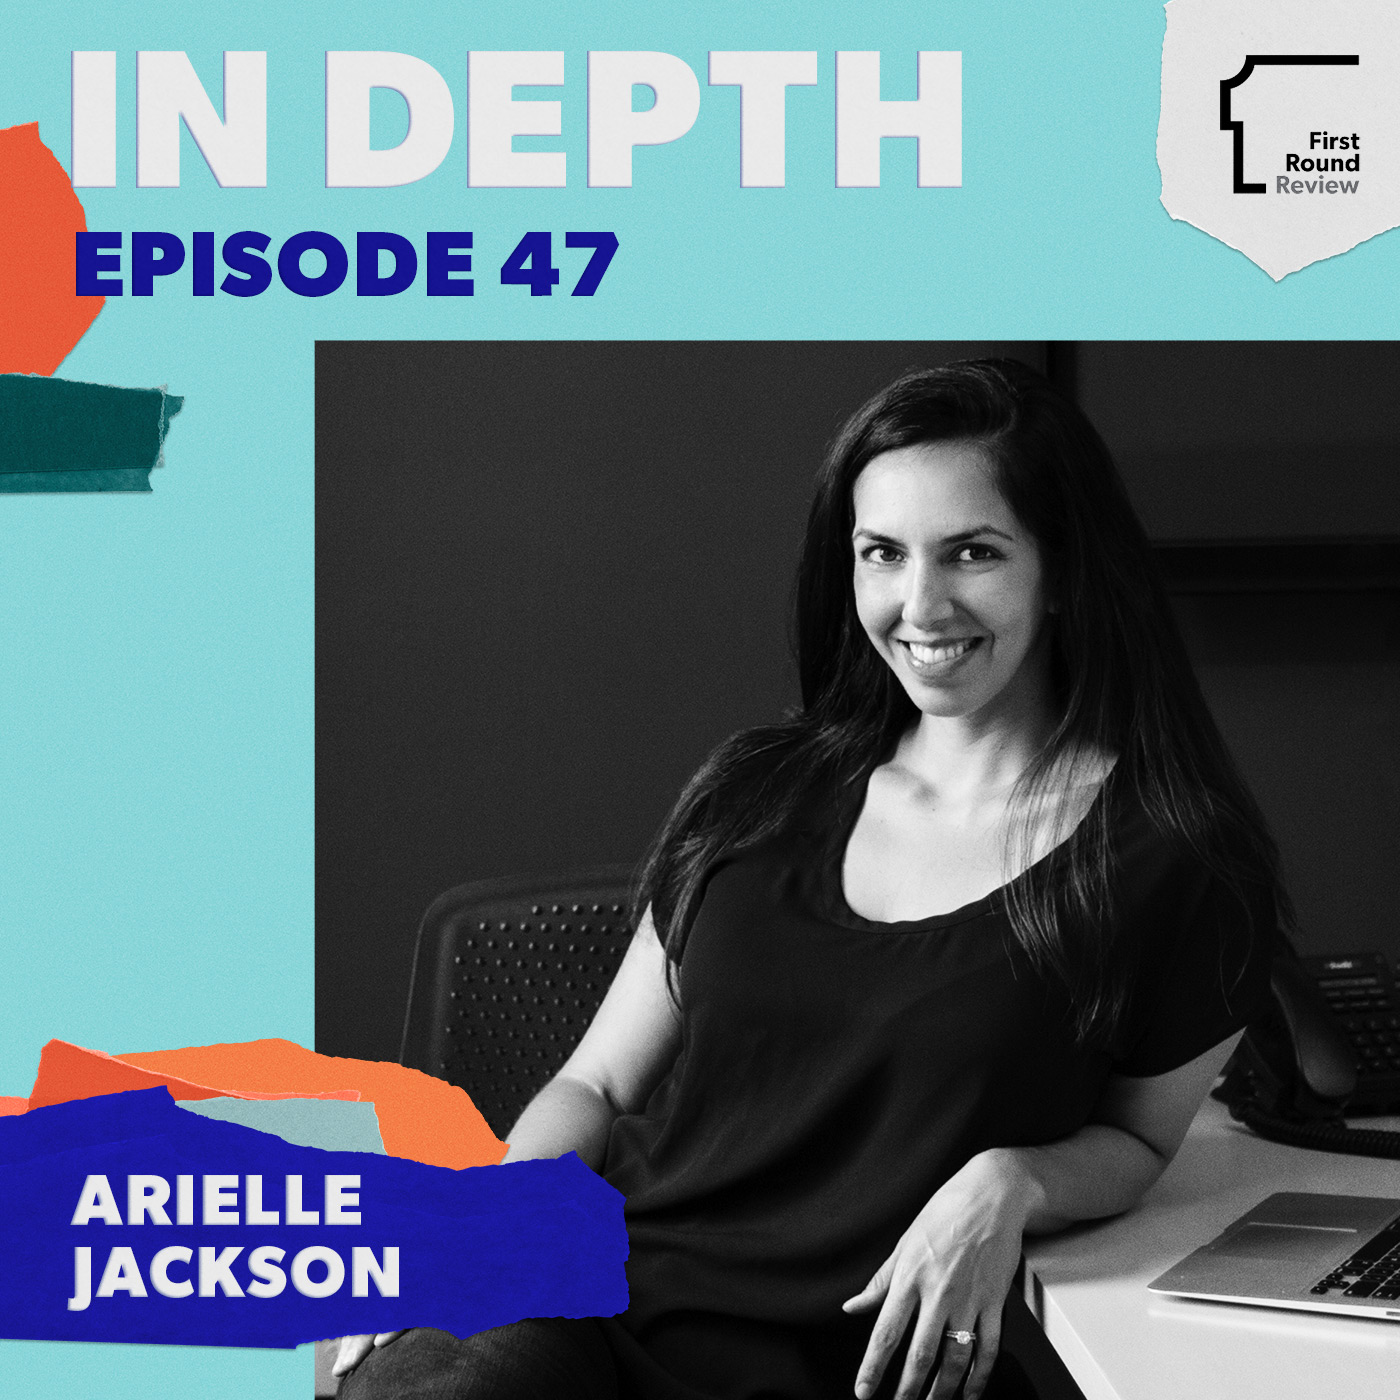 After building hundreds of startup brands, Arielle Jackson shares 6 early marketing missteps to avoid